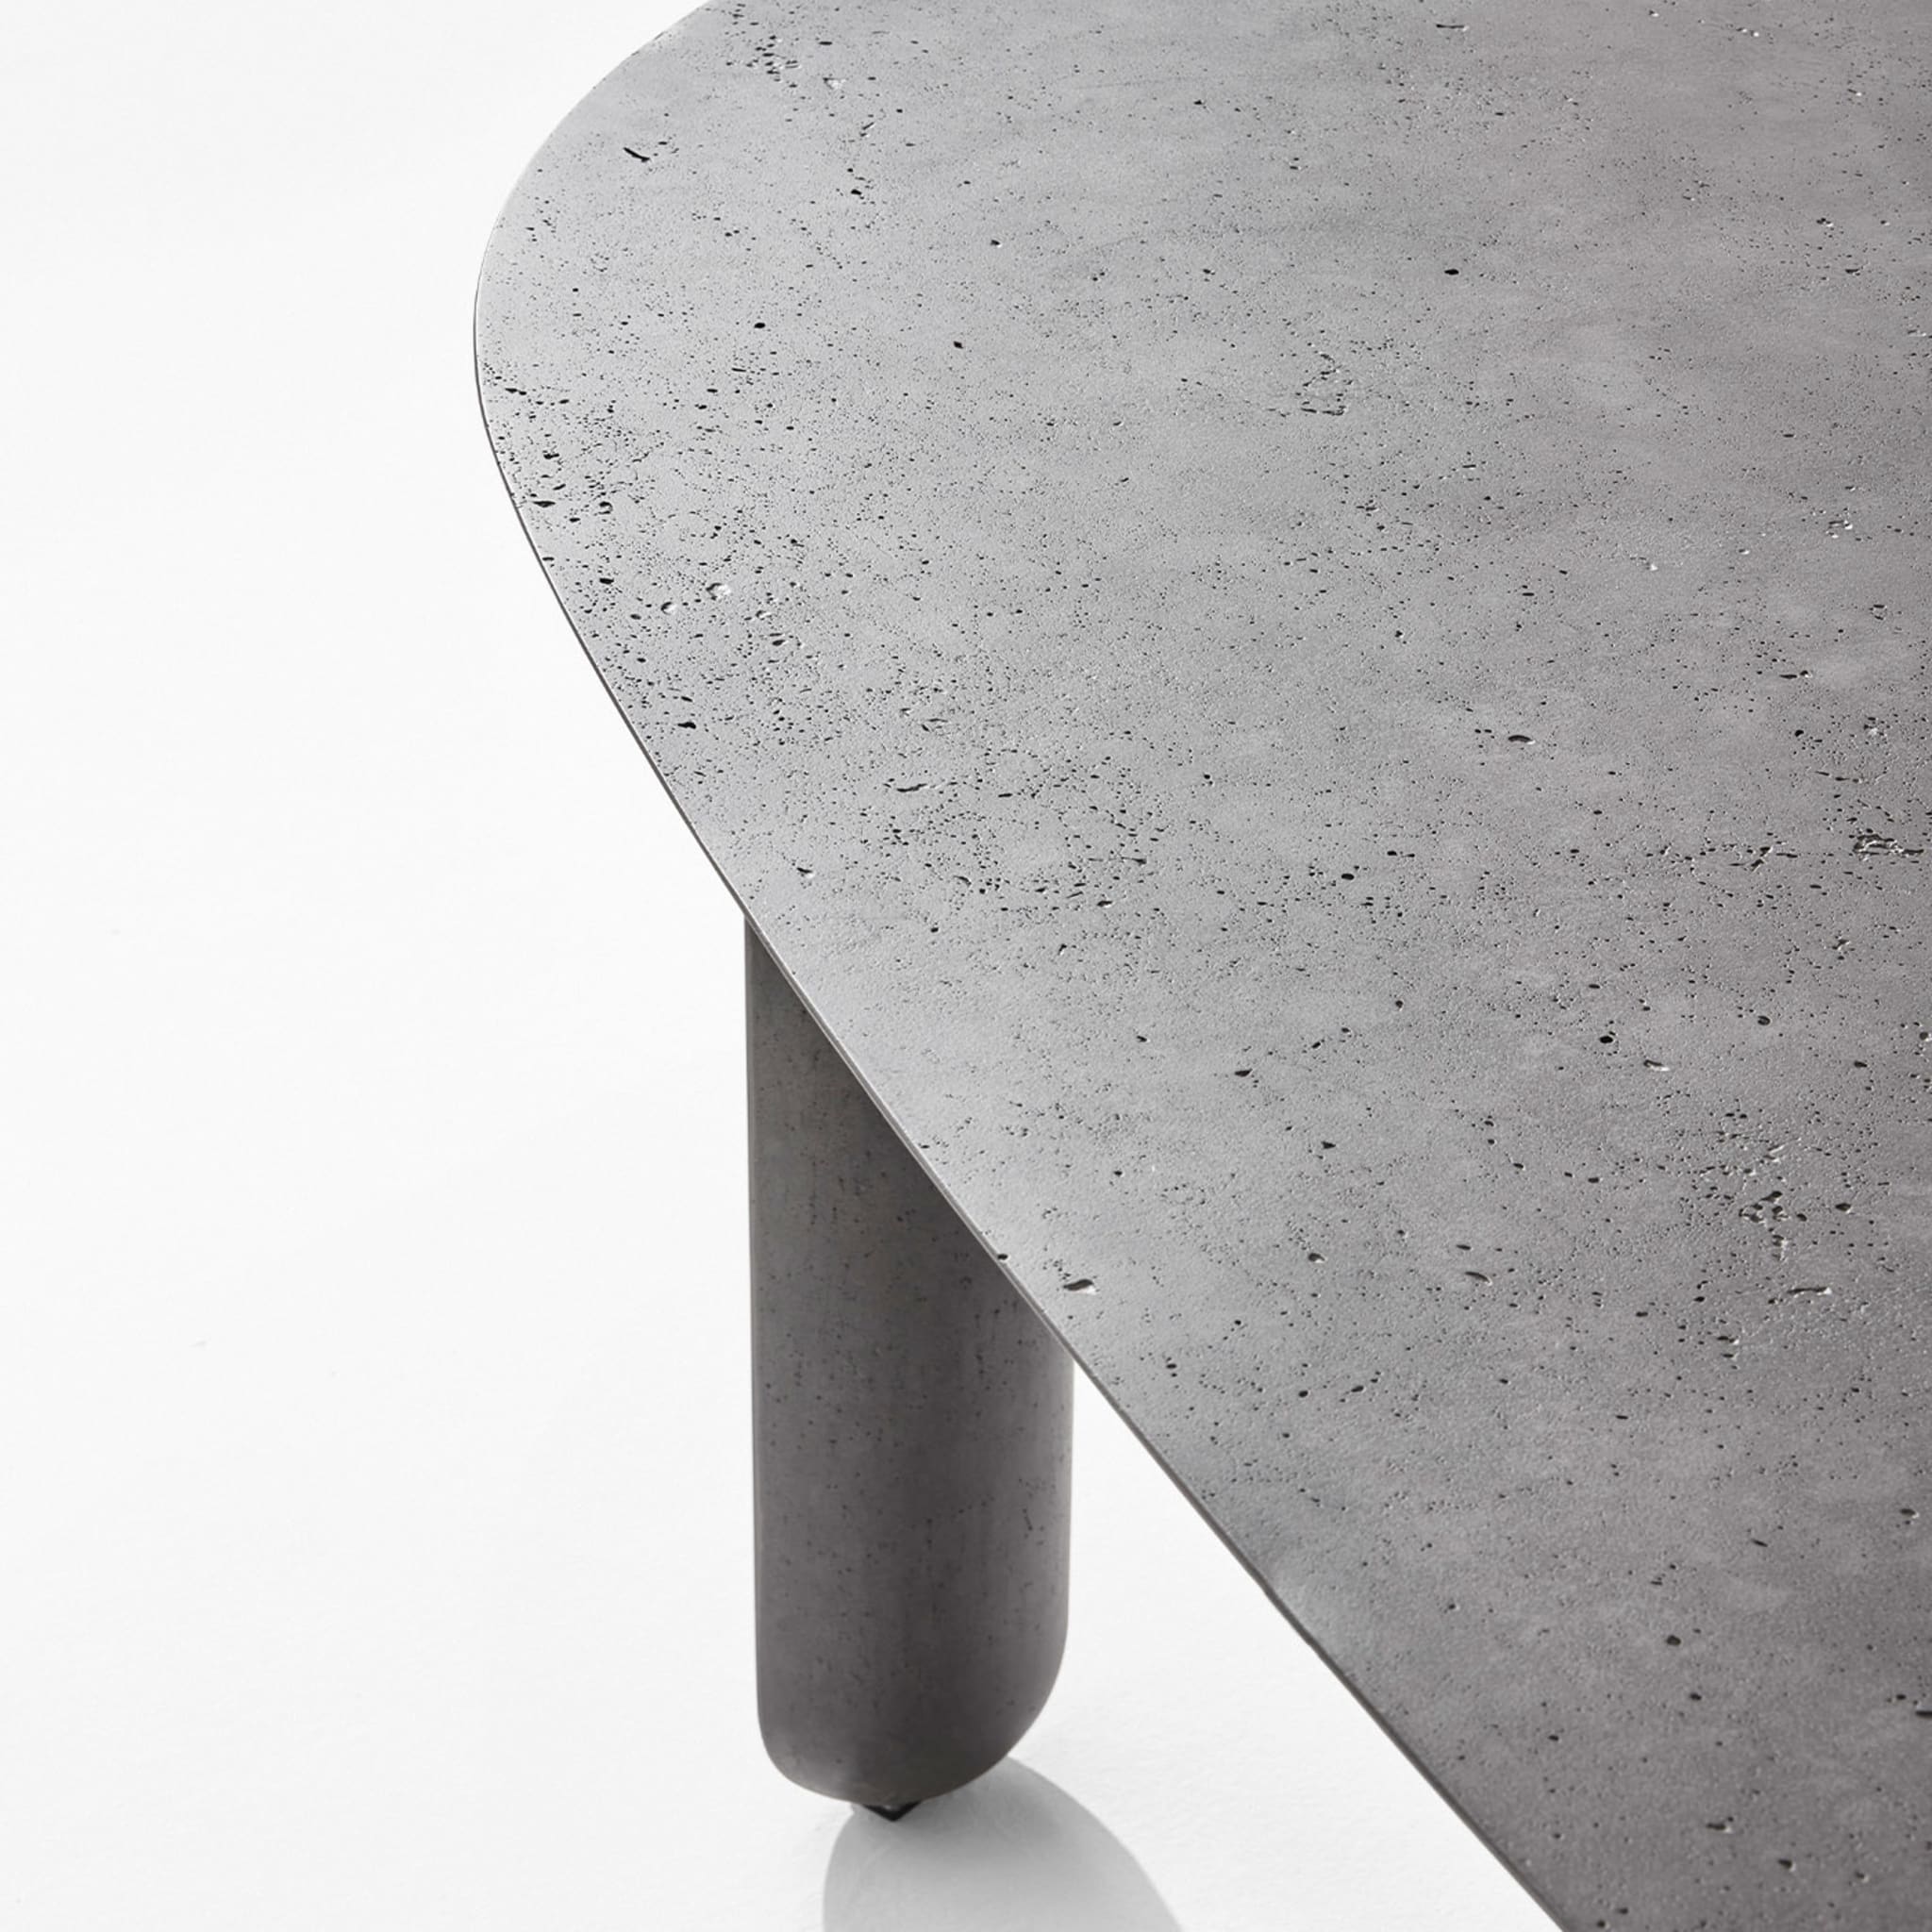 Lido Table by Parisotto and Formenton - Alternative view 2